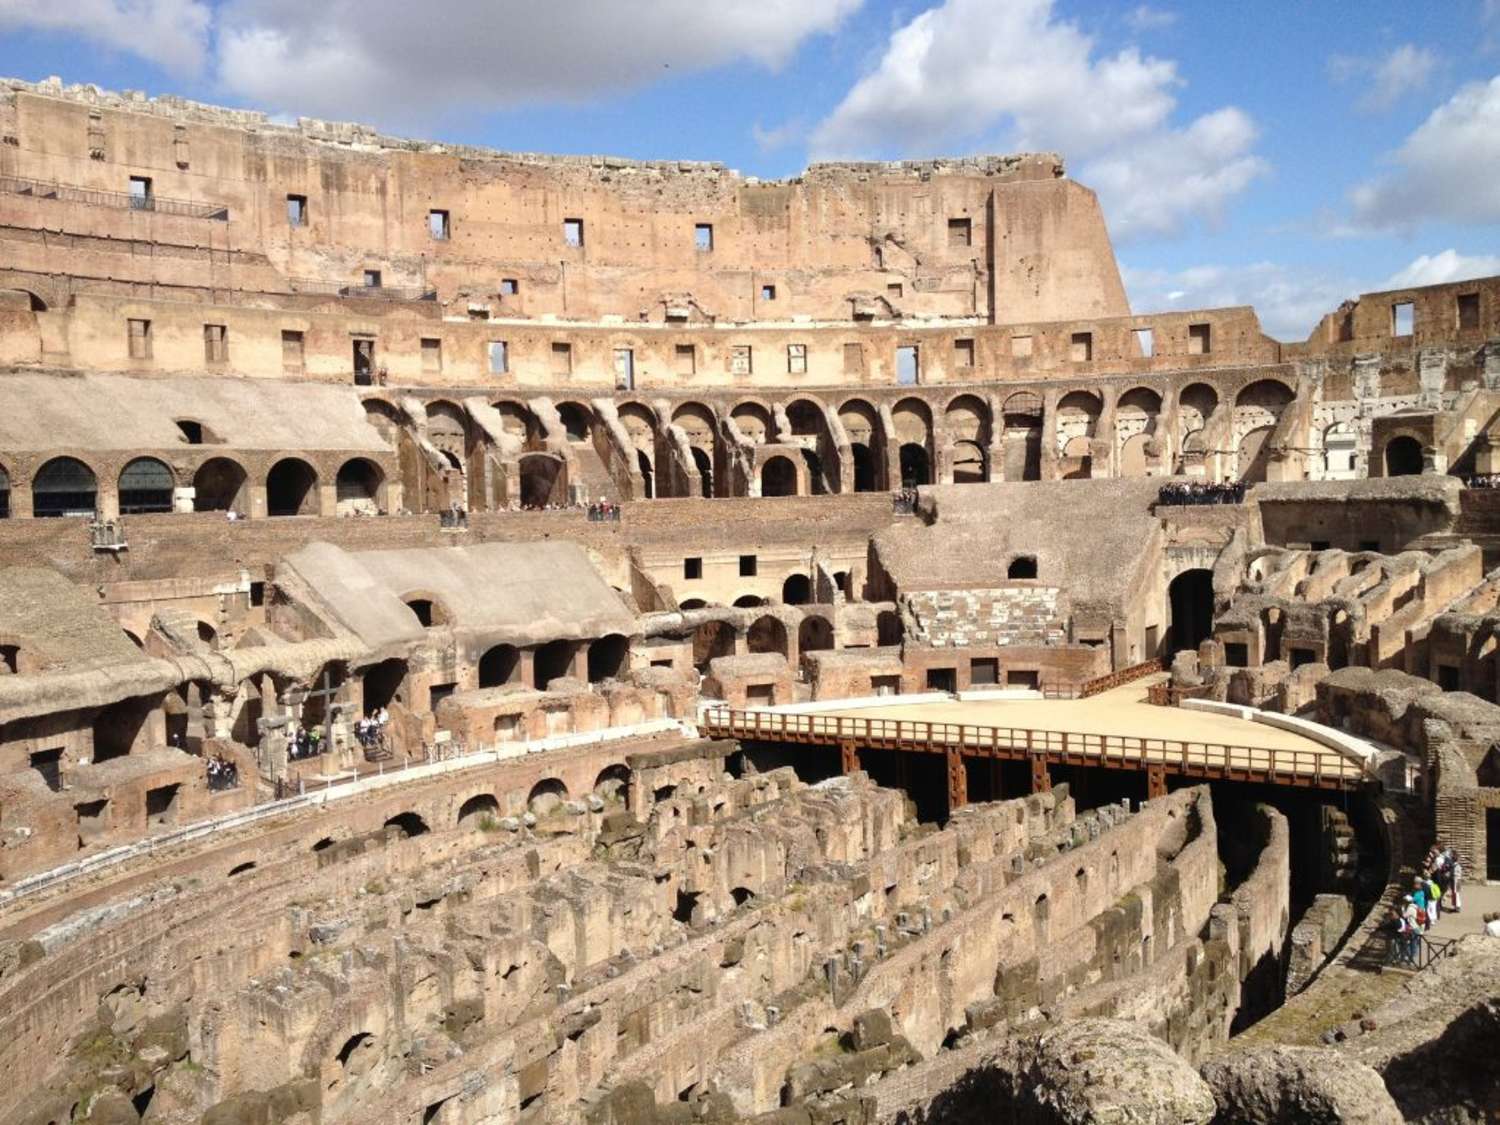 view of the interior of the Colosseum